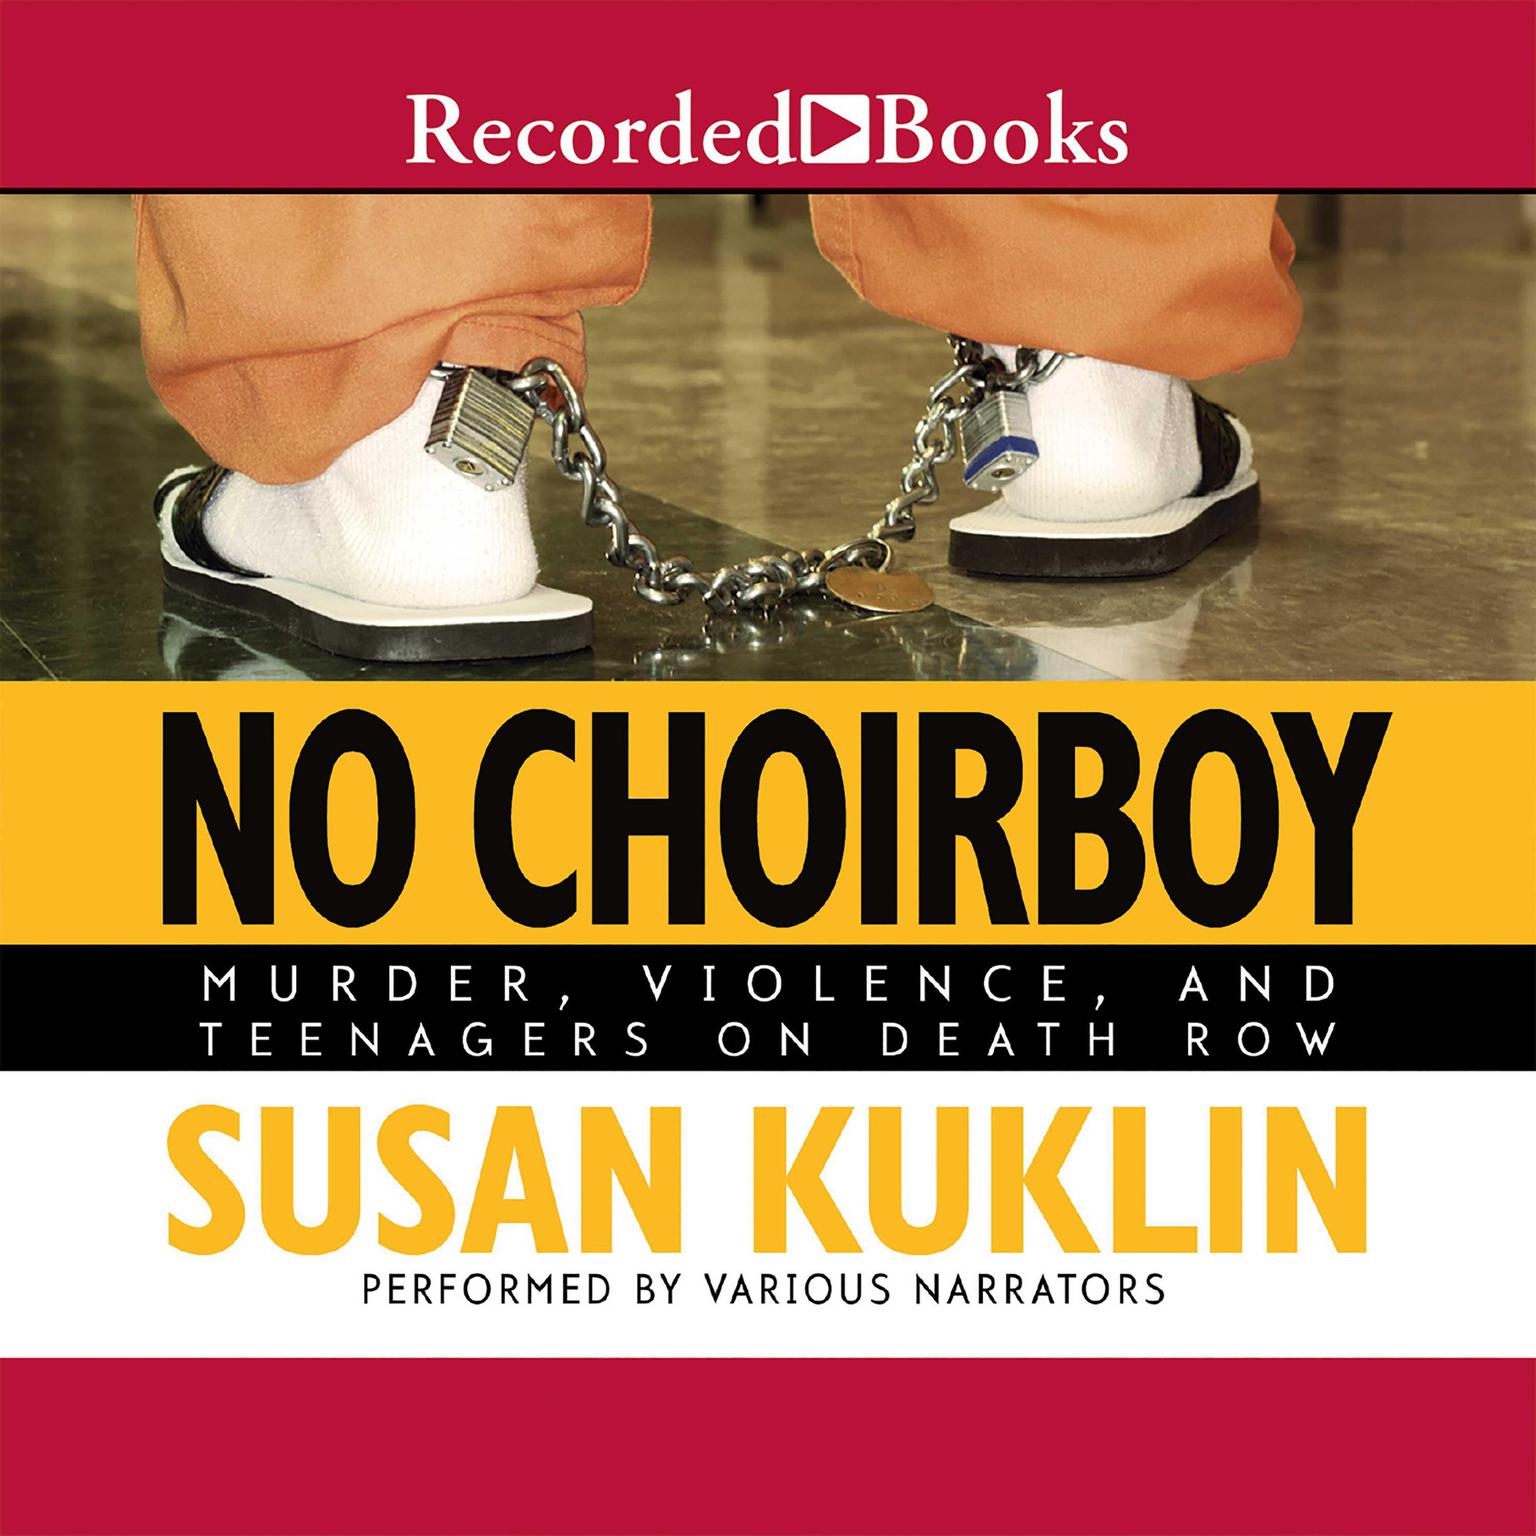 No Choirboy: Murder, Violence, and Teenagers on Death Row Audiobook, by Susan Kuklin